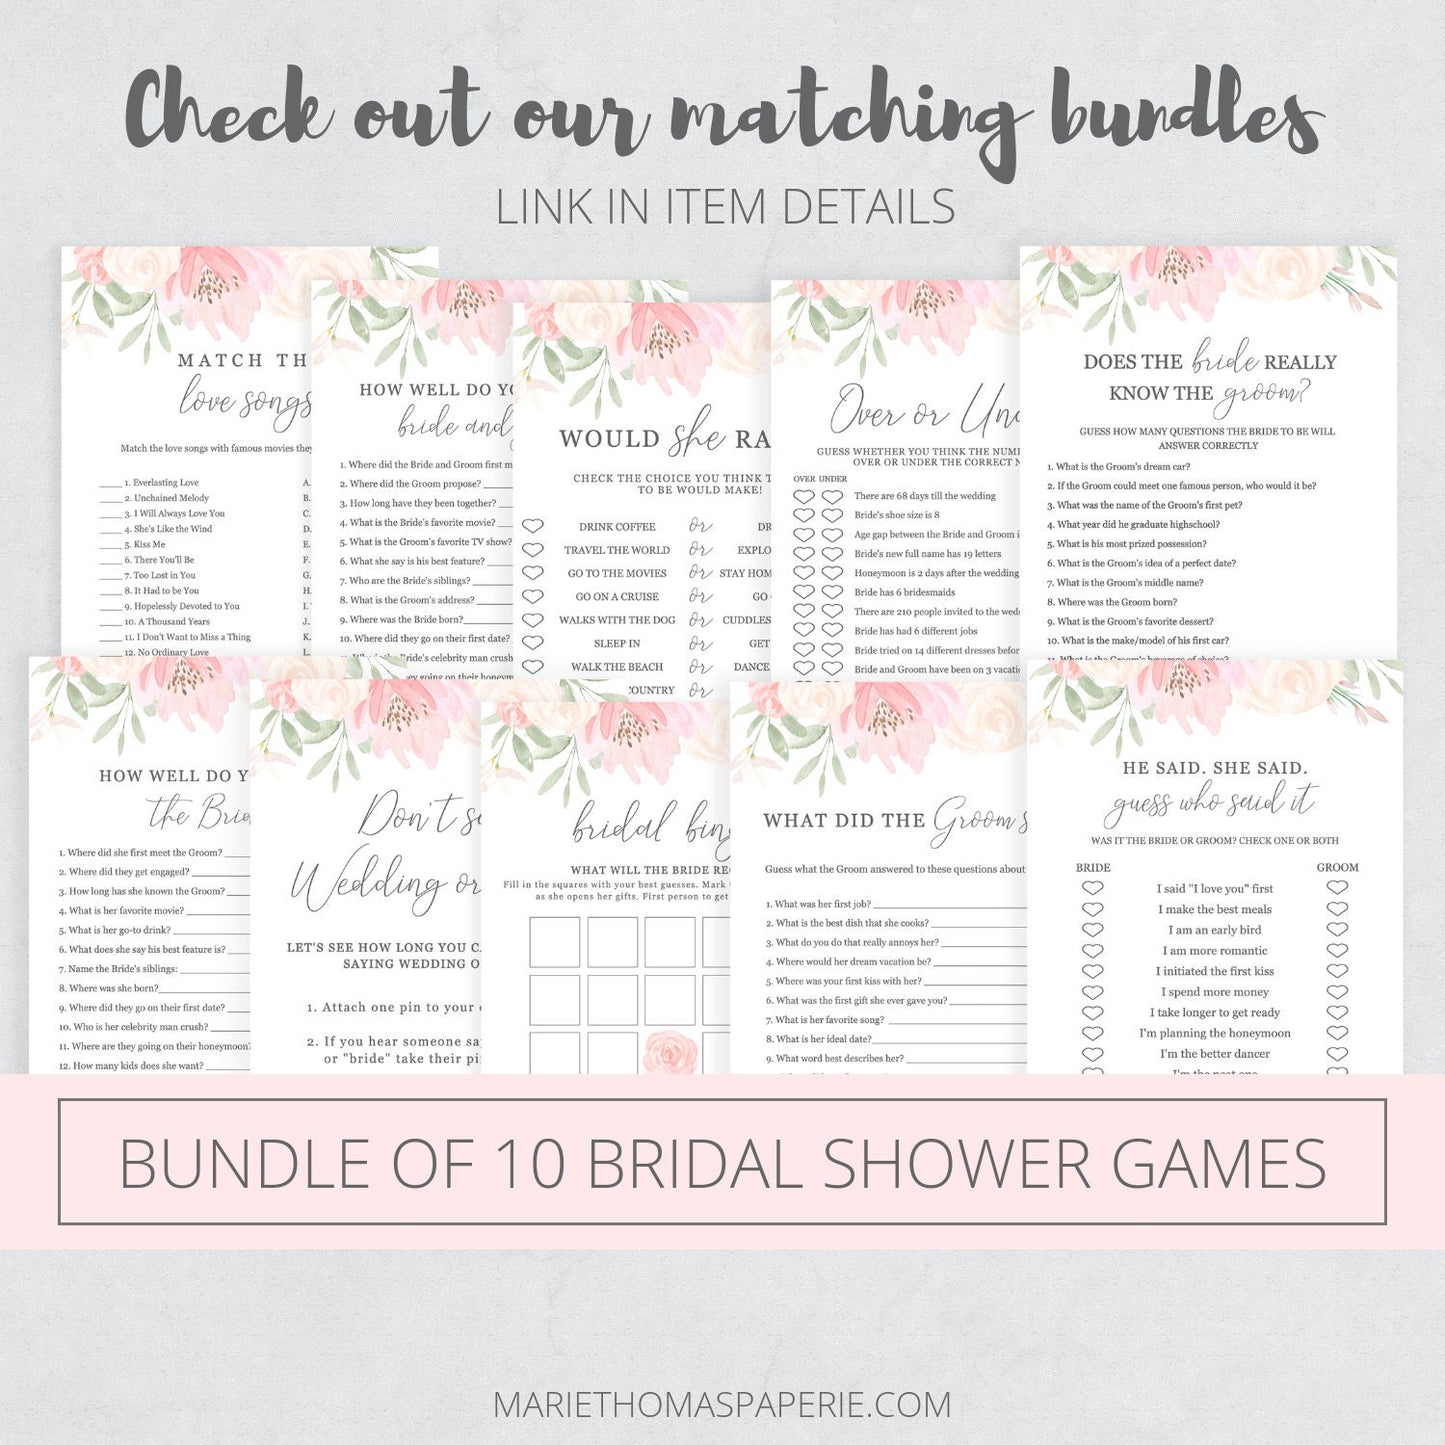 Editable Match the Love Songs Bridal Shower Games Wedding Shower Games Template